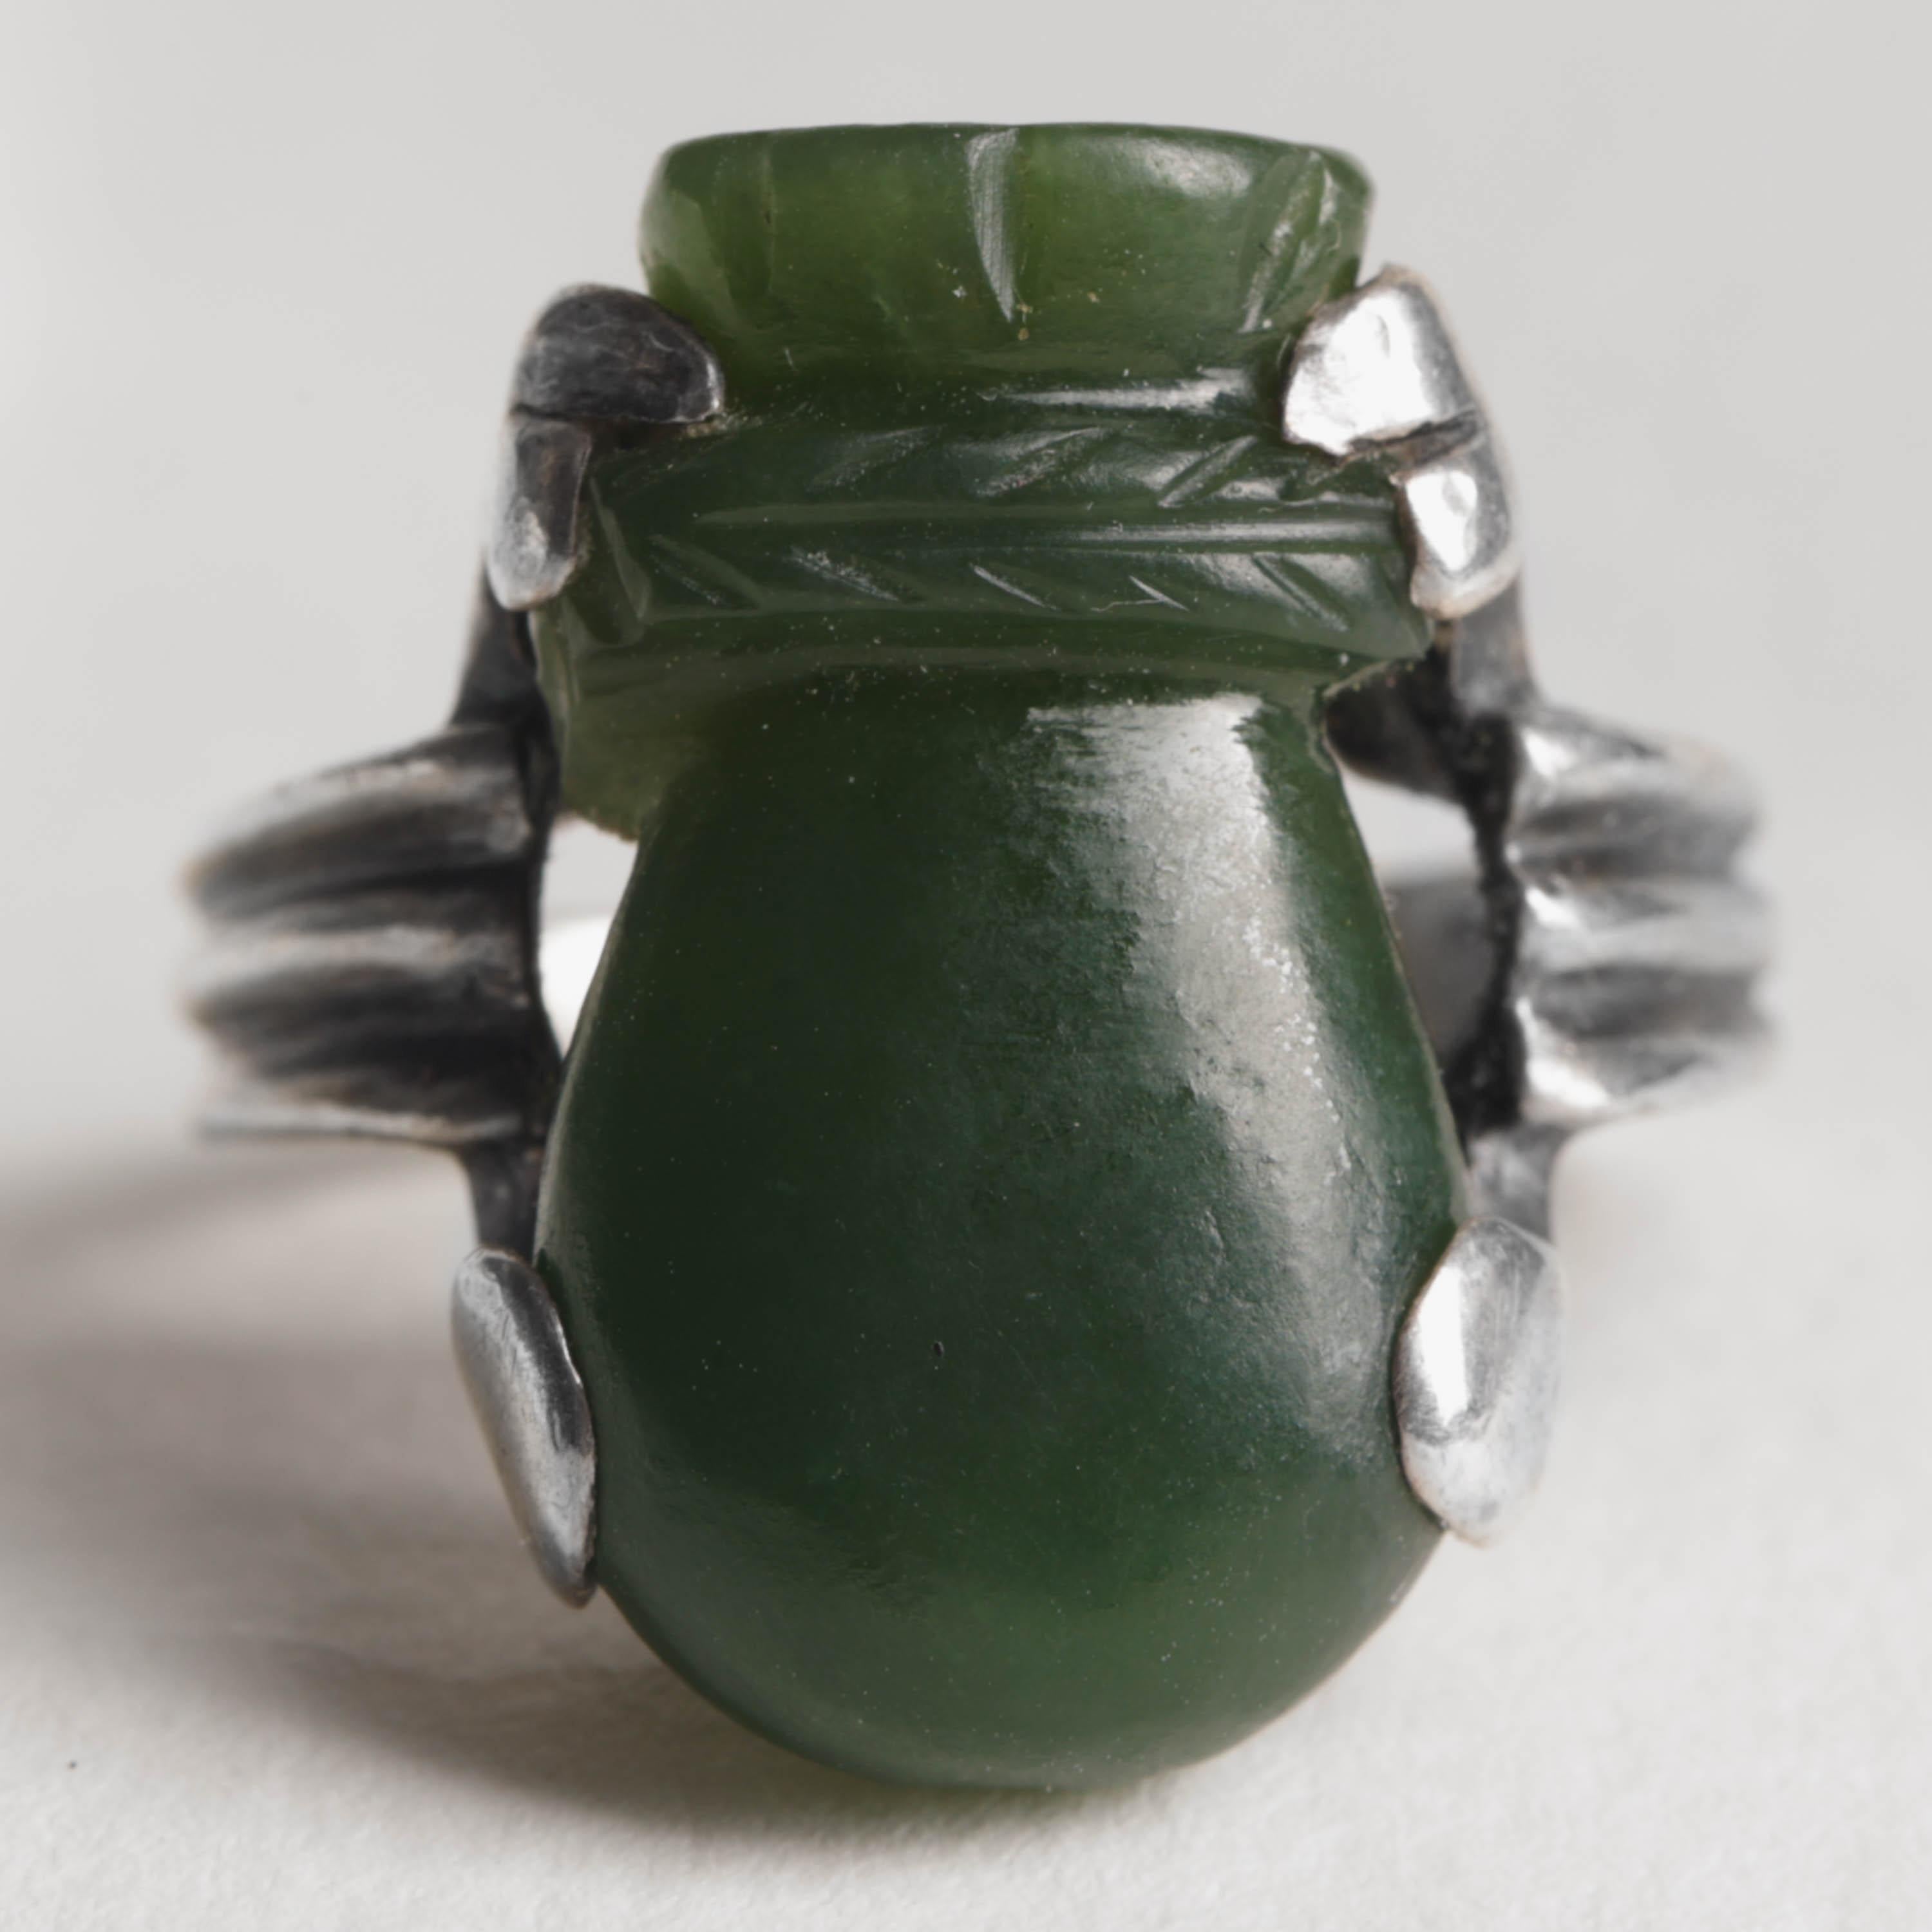 This Art Deco era ring (circa 1930s) features a hand-carved nephrite jade in the shape of a bottle gourd;  a powerful symbol in the historical Chinese culture endowed with magical significance. The bottle gourd carried medicine, water, and food; it